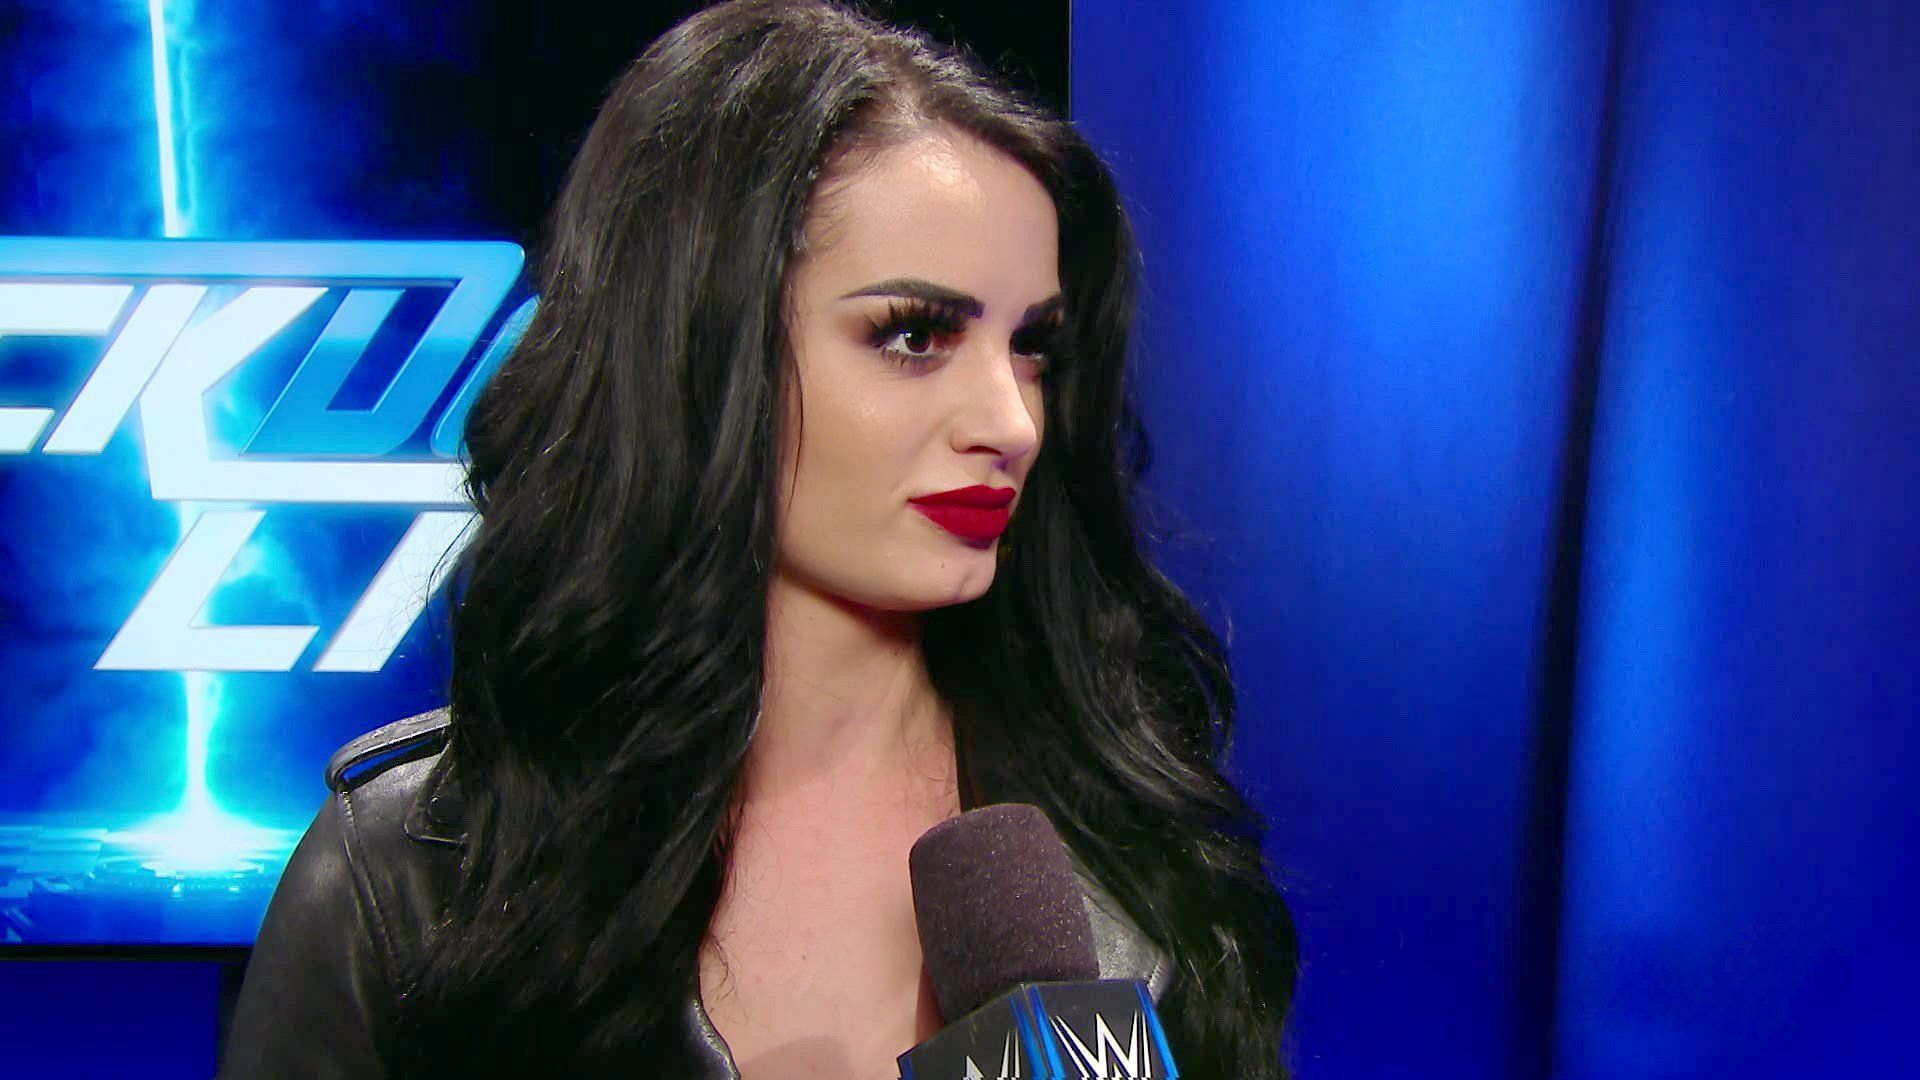 Paige recently came out of retirement